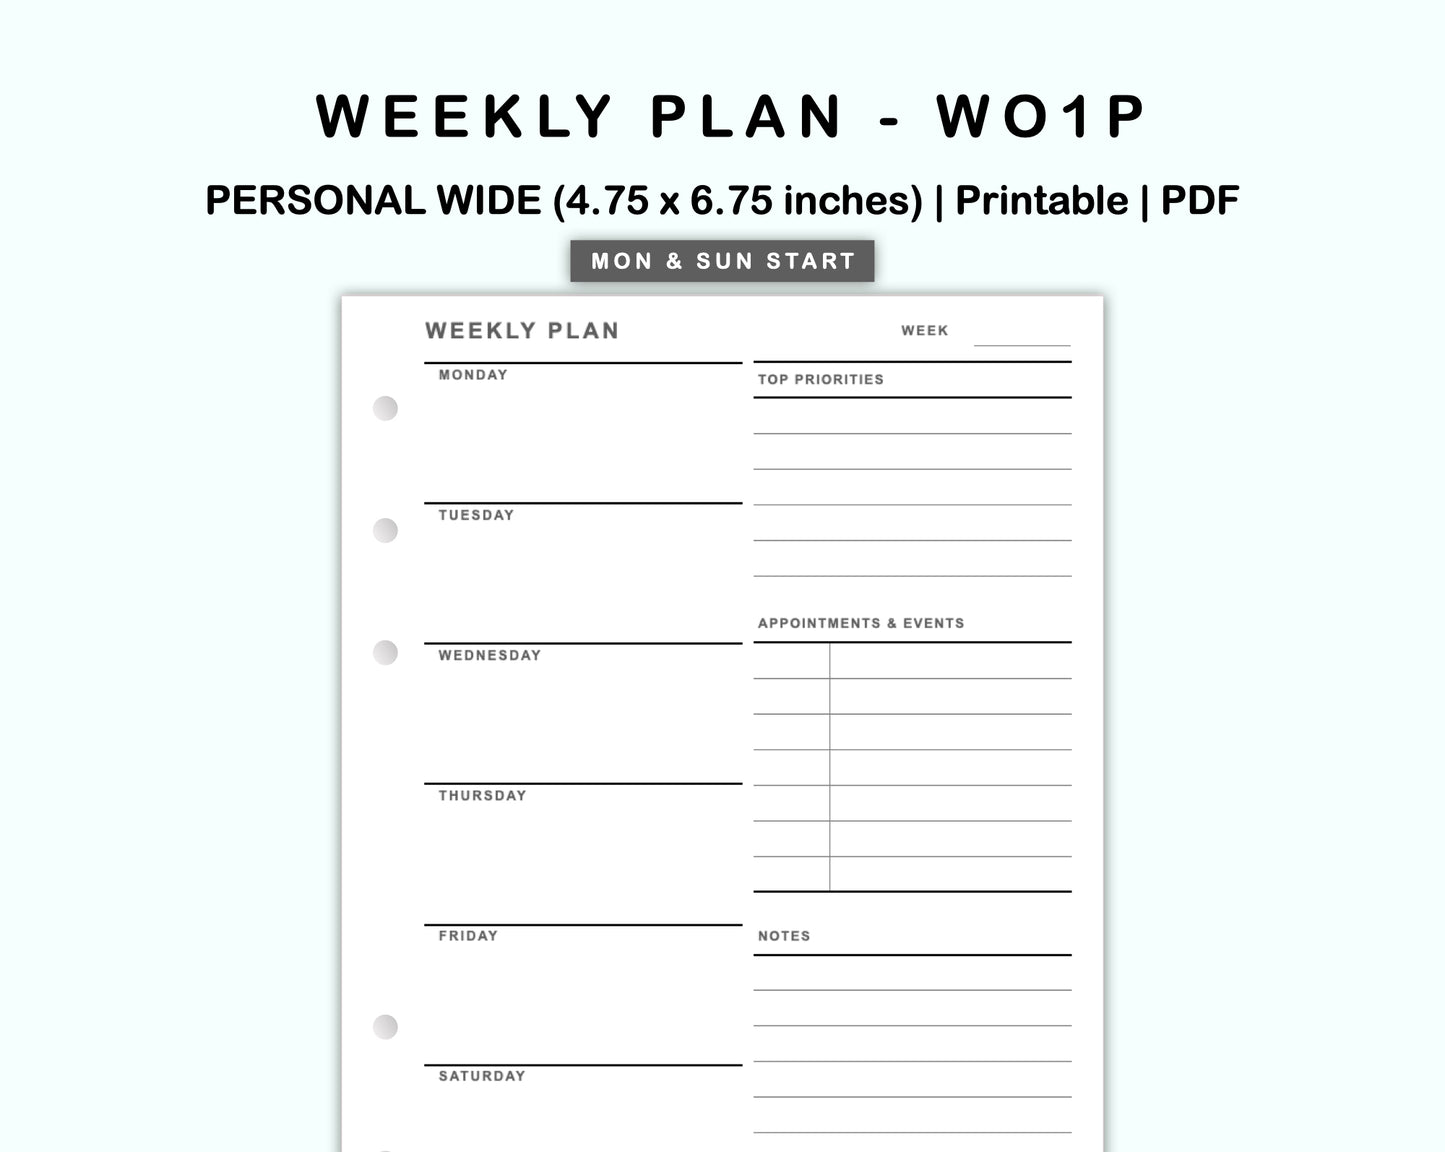 Personal Wide Inserts - Weekly Plan - WO1P - with Top Priority